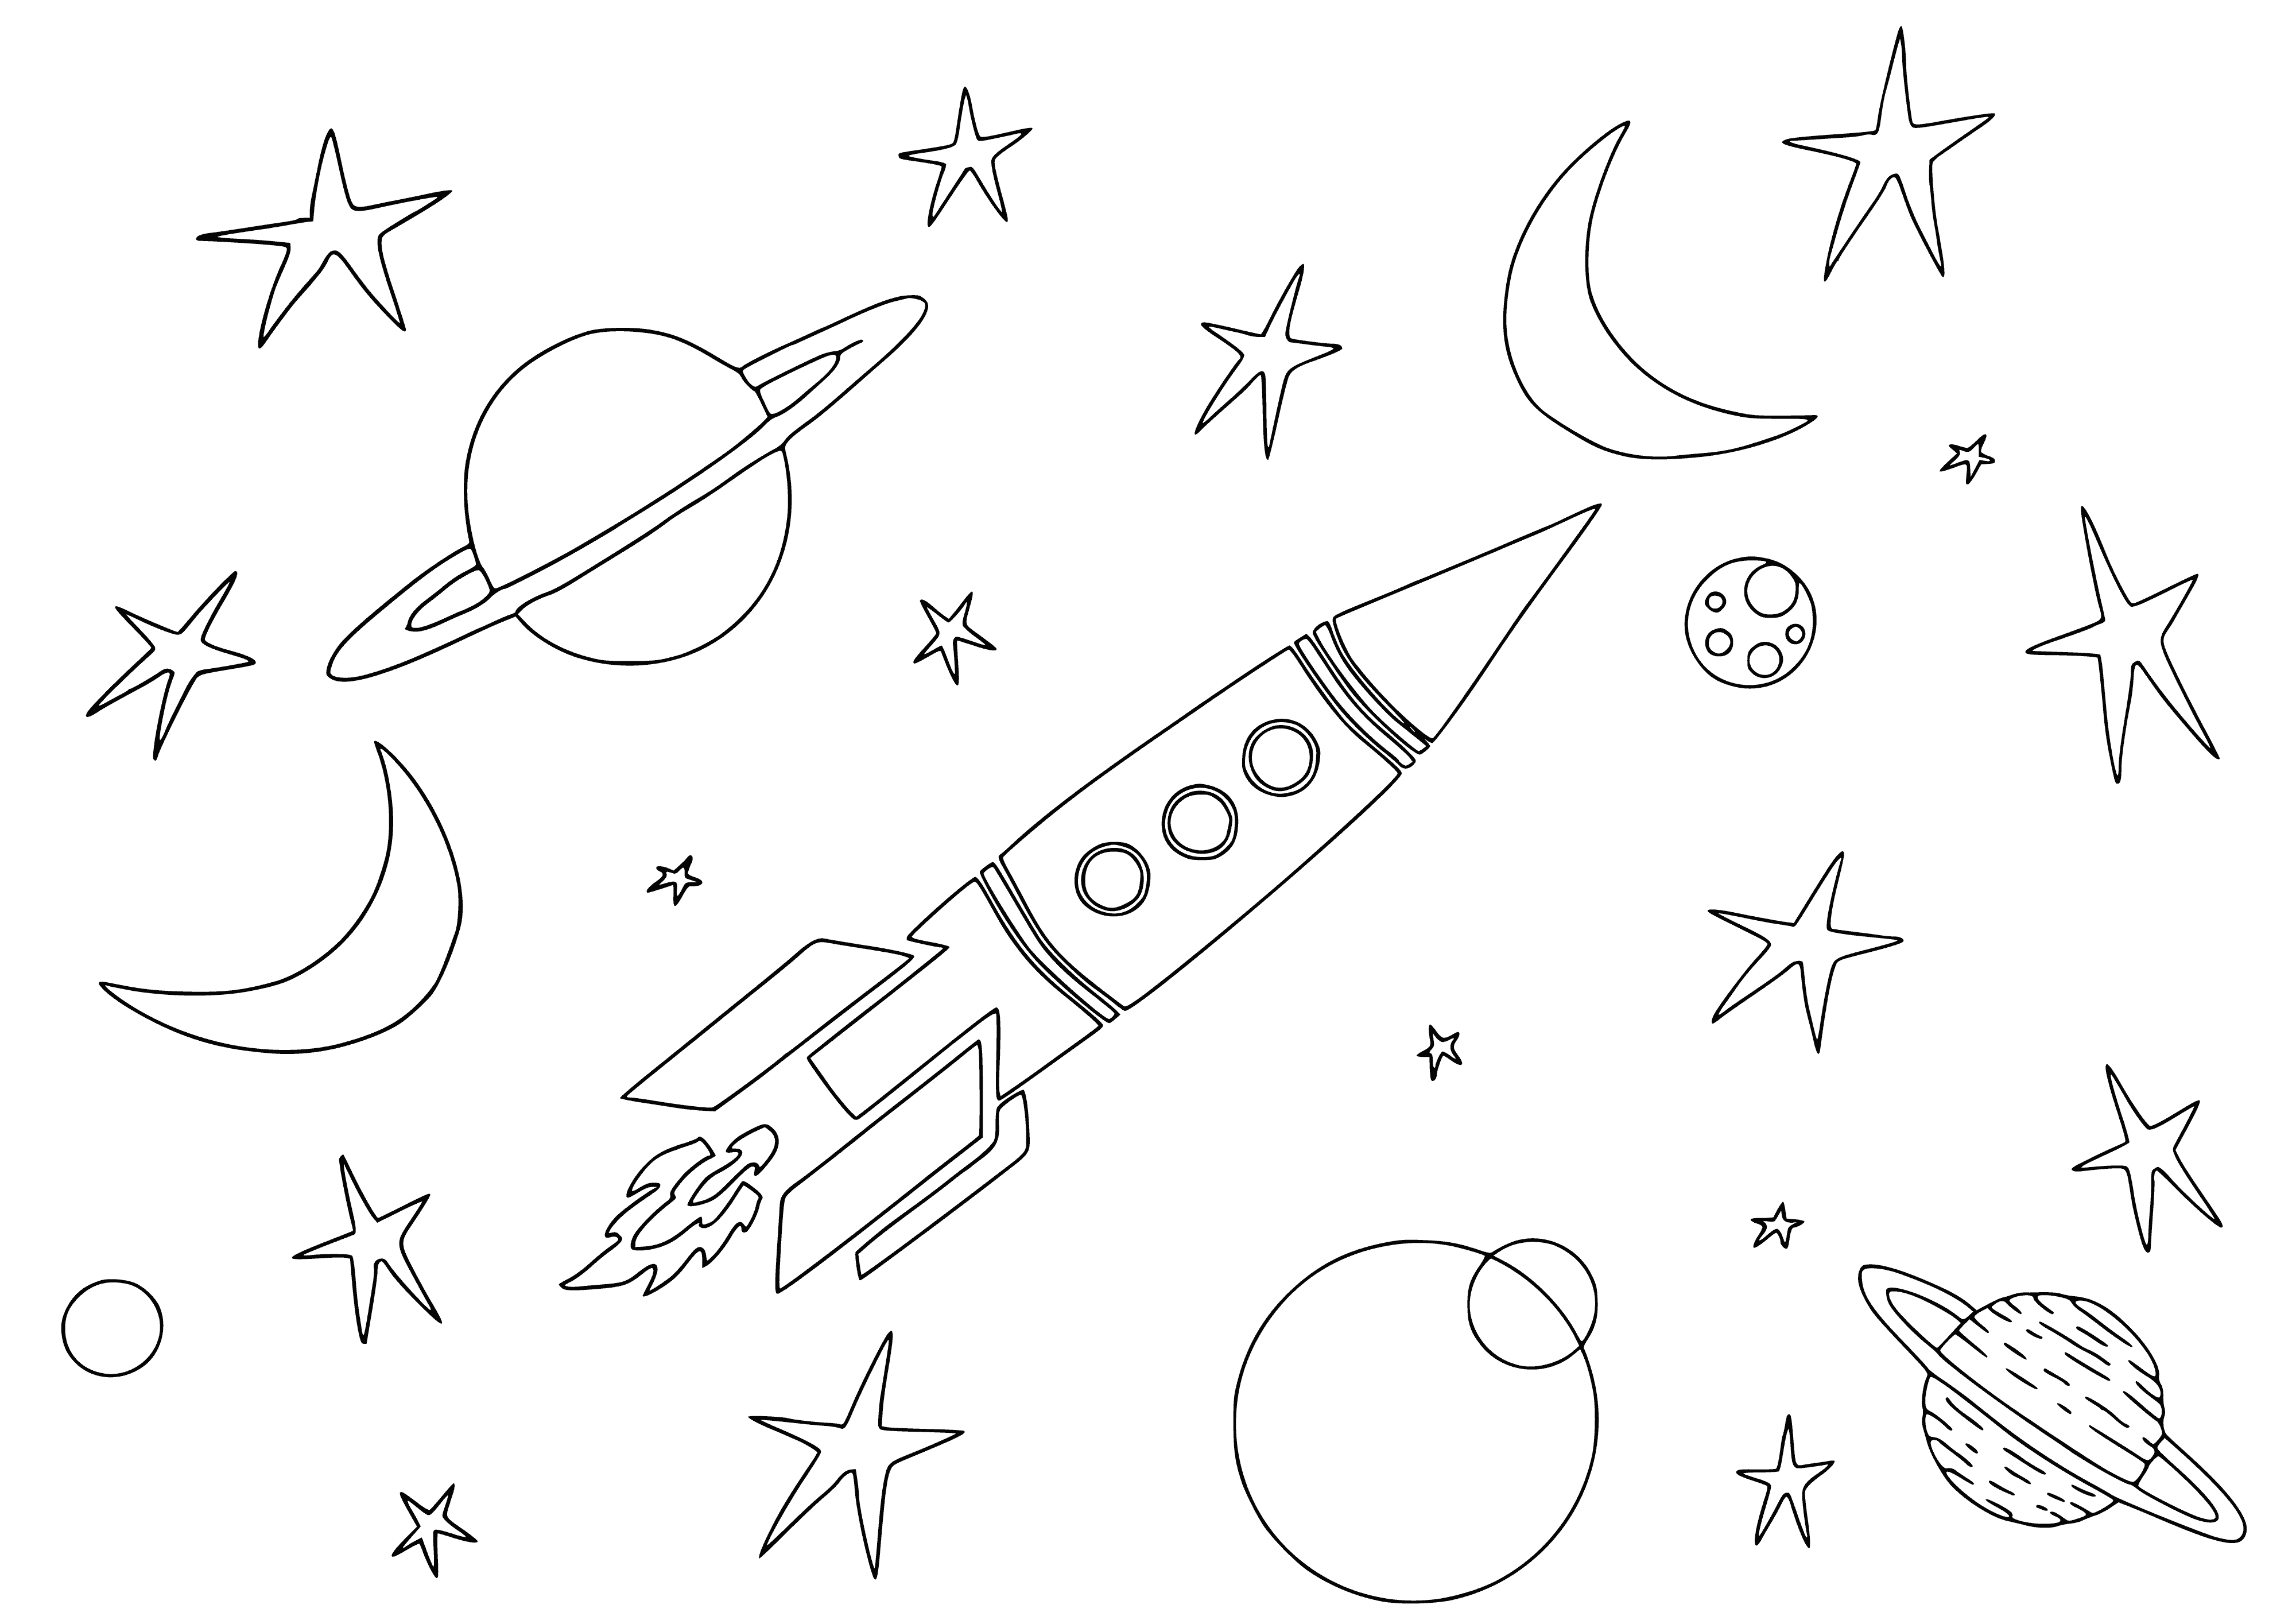 coloring page: Coloring page features black bg, white dot pattern, large white circle w/ black center containing white dot, & lots of small white dots around.